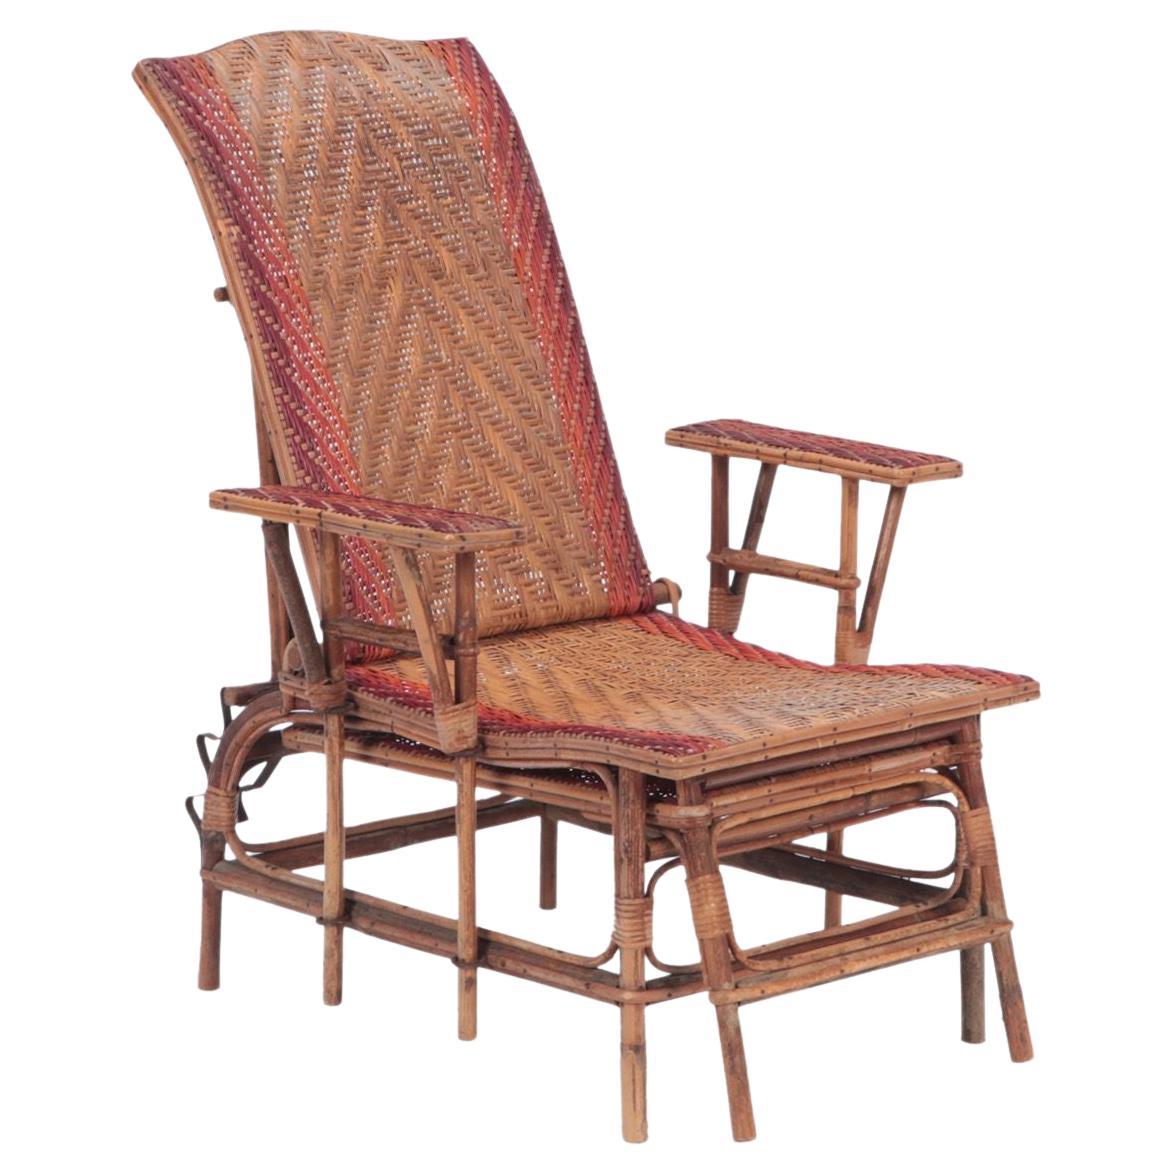 French Rattan Chaise Longue with Orange and Red Stripes, circa 1900 For Sale